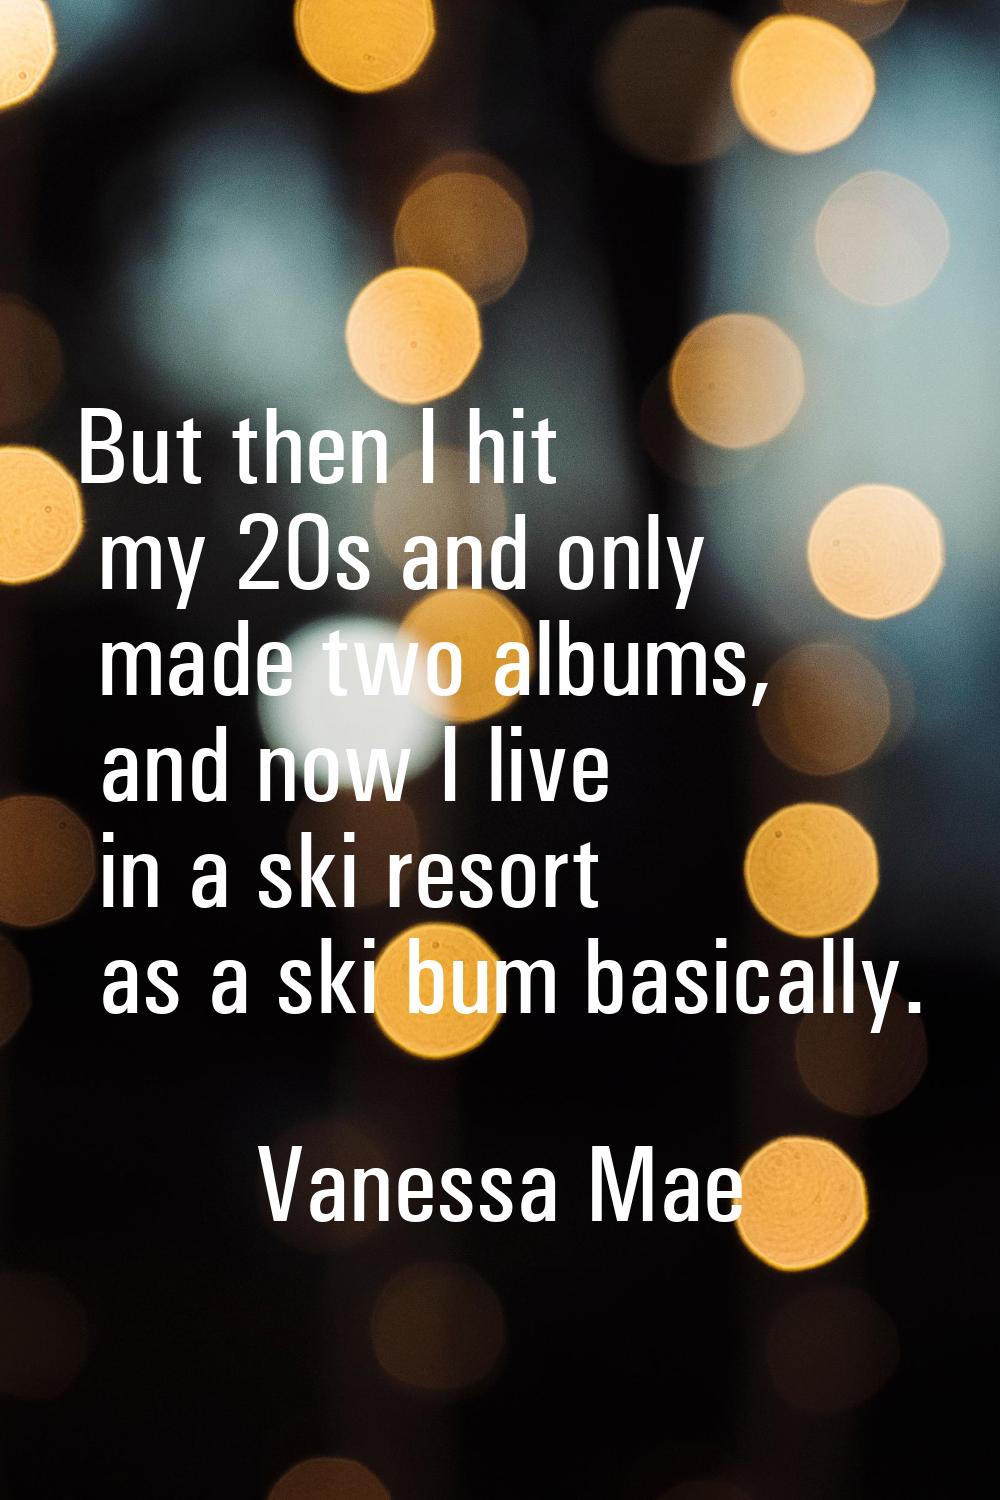 But then I hit my 20s and only made two albums, and now I live in a ski resort as a ski bum basical